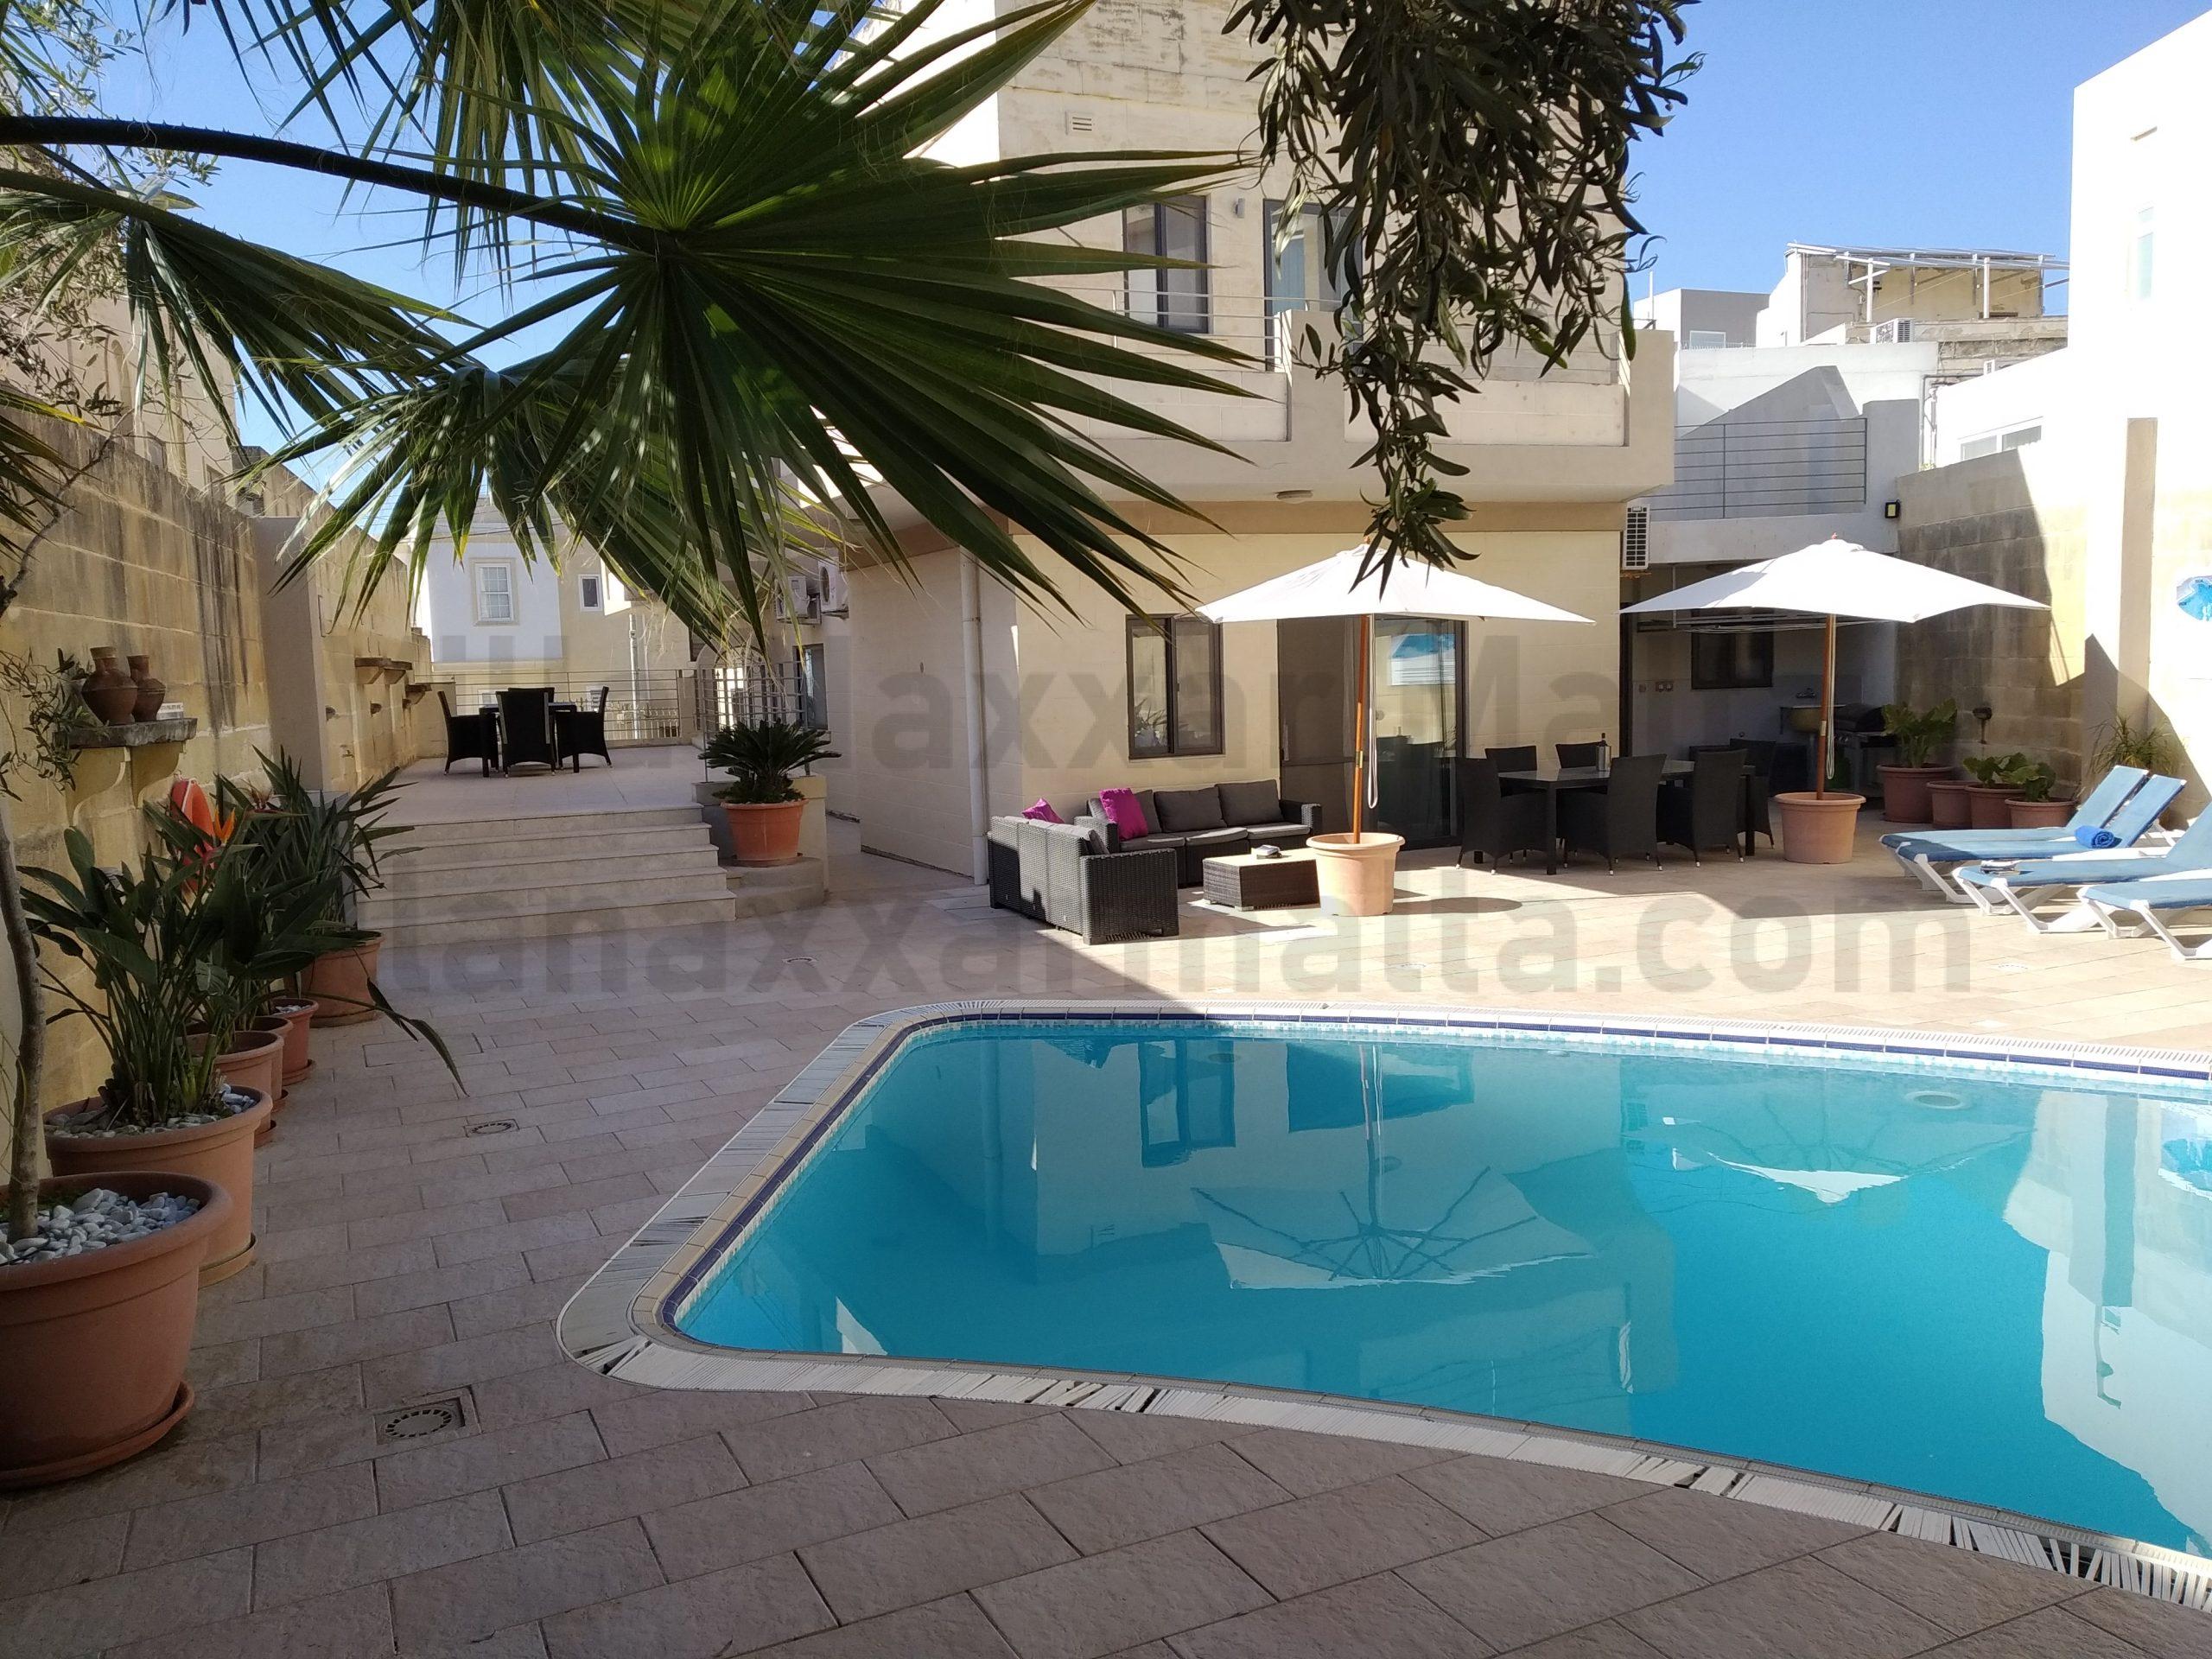 Villa Naxxar Malta - Massive outdoor areas with private pool, sunbeds, deck-chairs, very large dining and seating areas, BBQ, WIFI and more